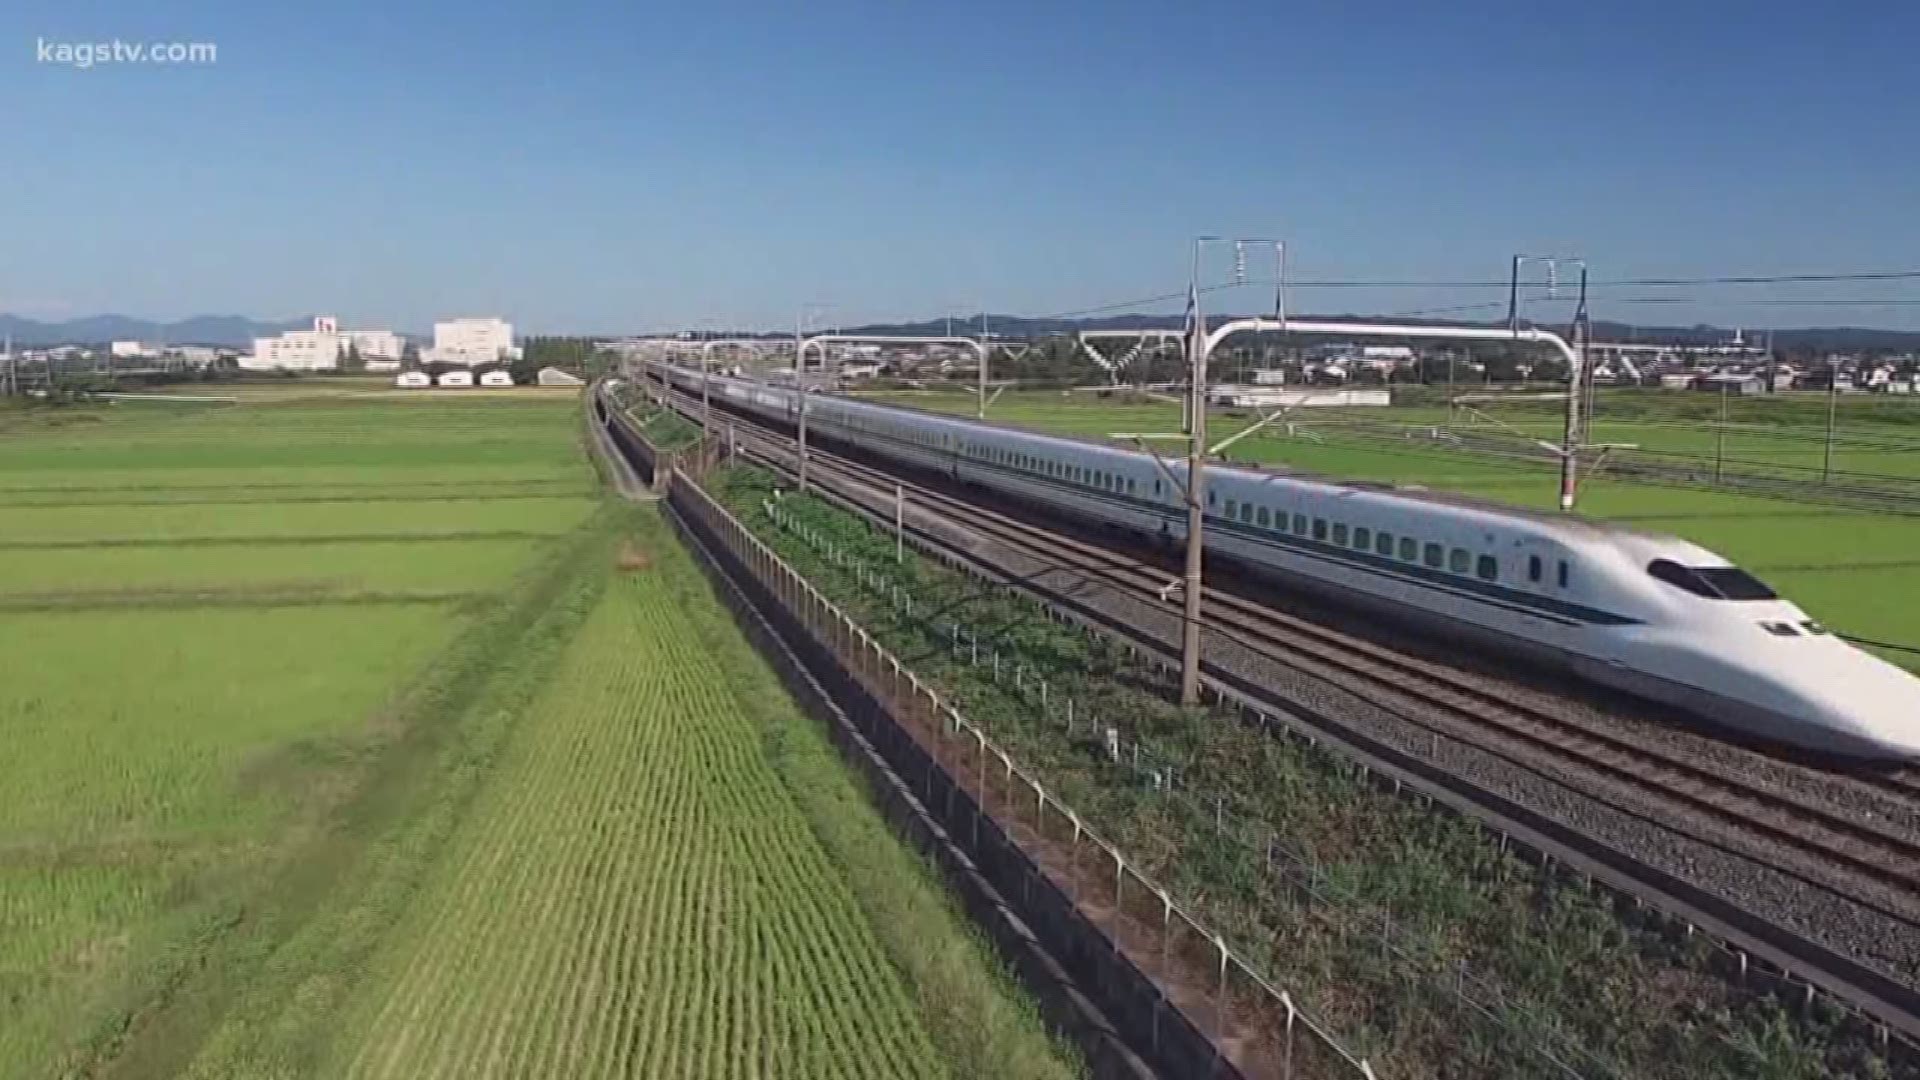 A new bill in the Texas Legislature could impact the path of the proposed Texas high speed railway.